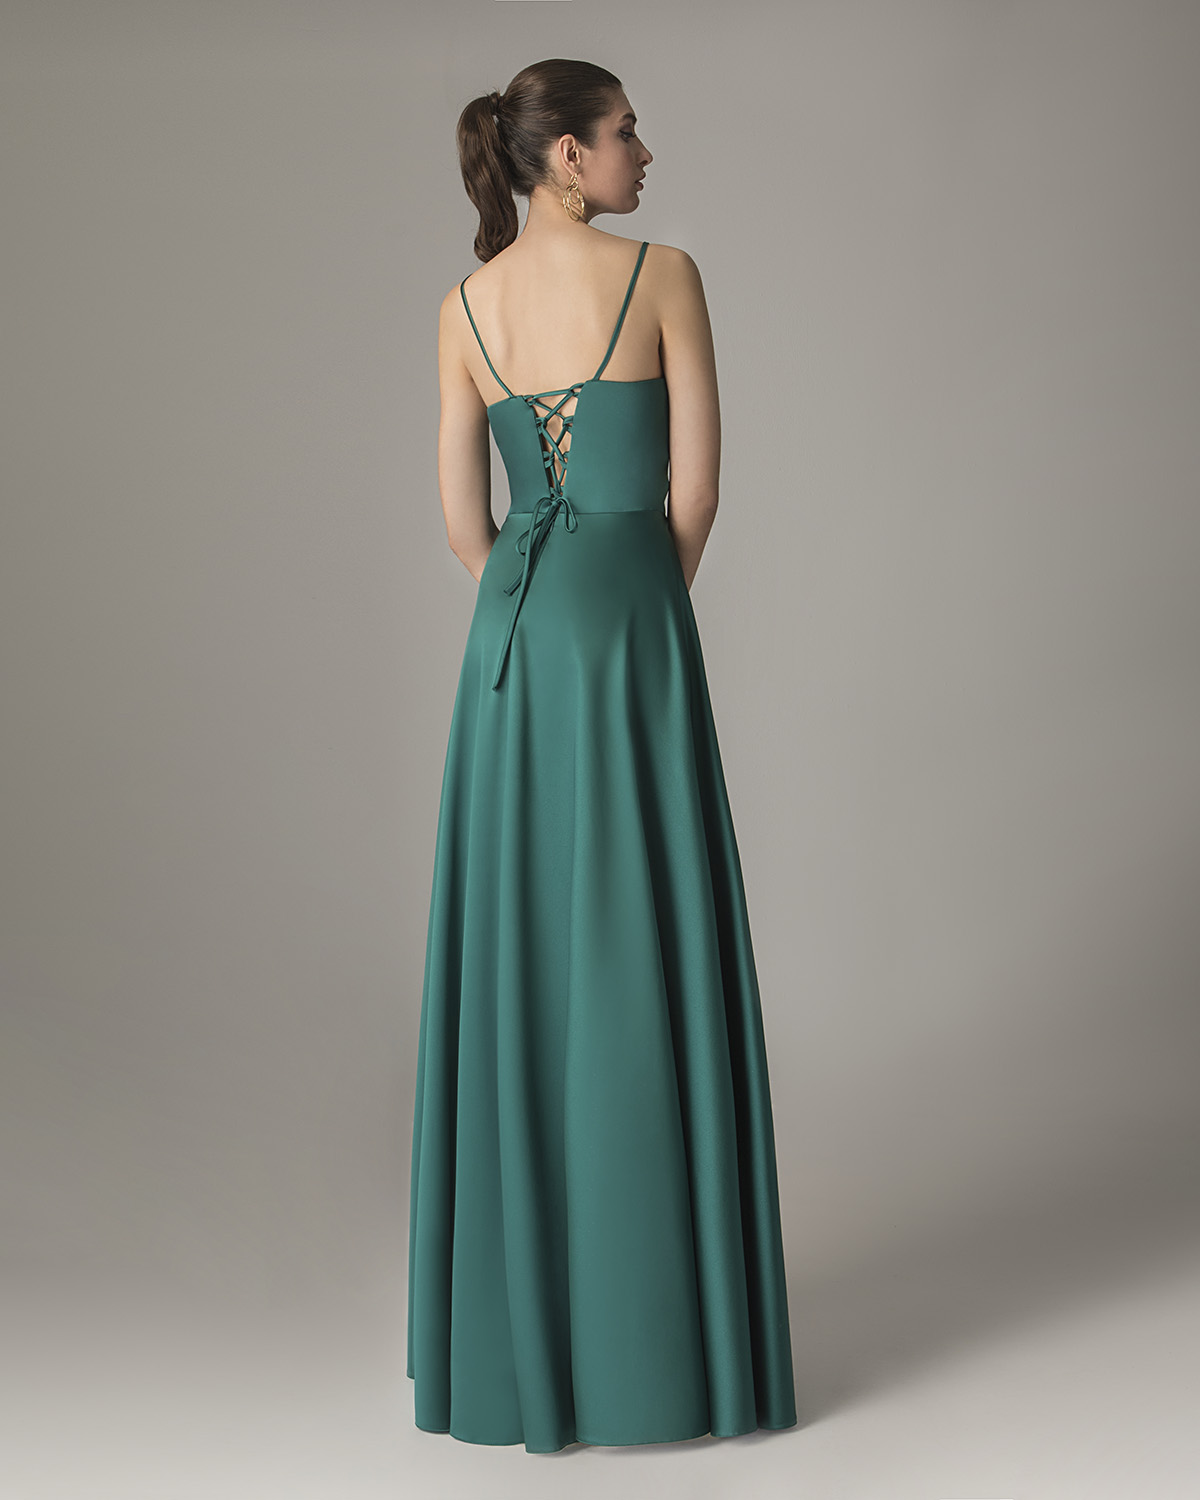 Cocktail Dresses / A long satin cocktail dress with open back